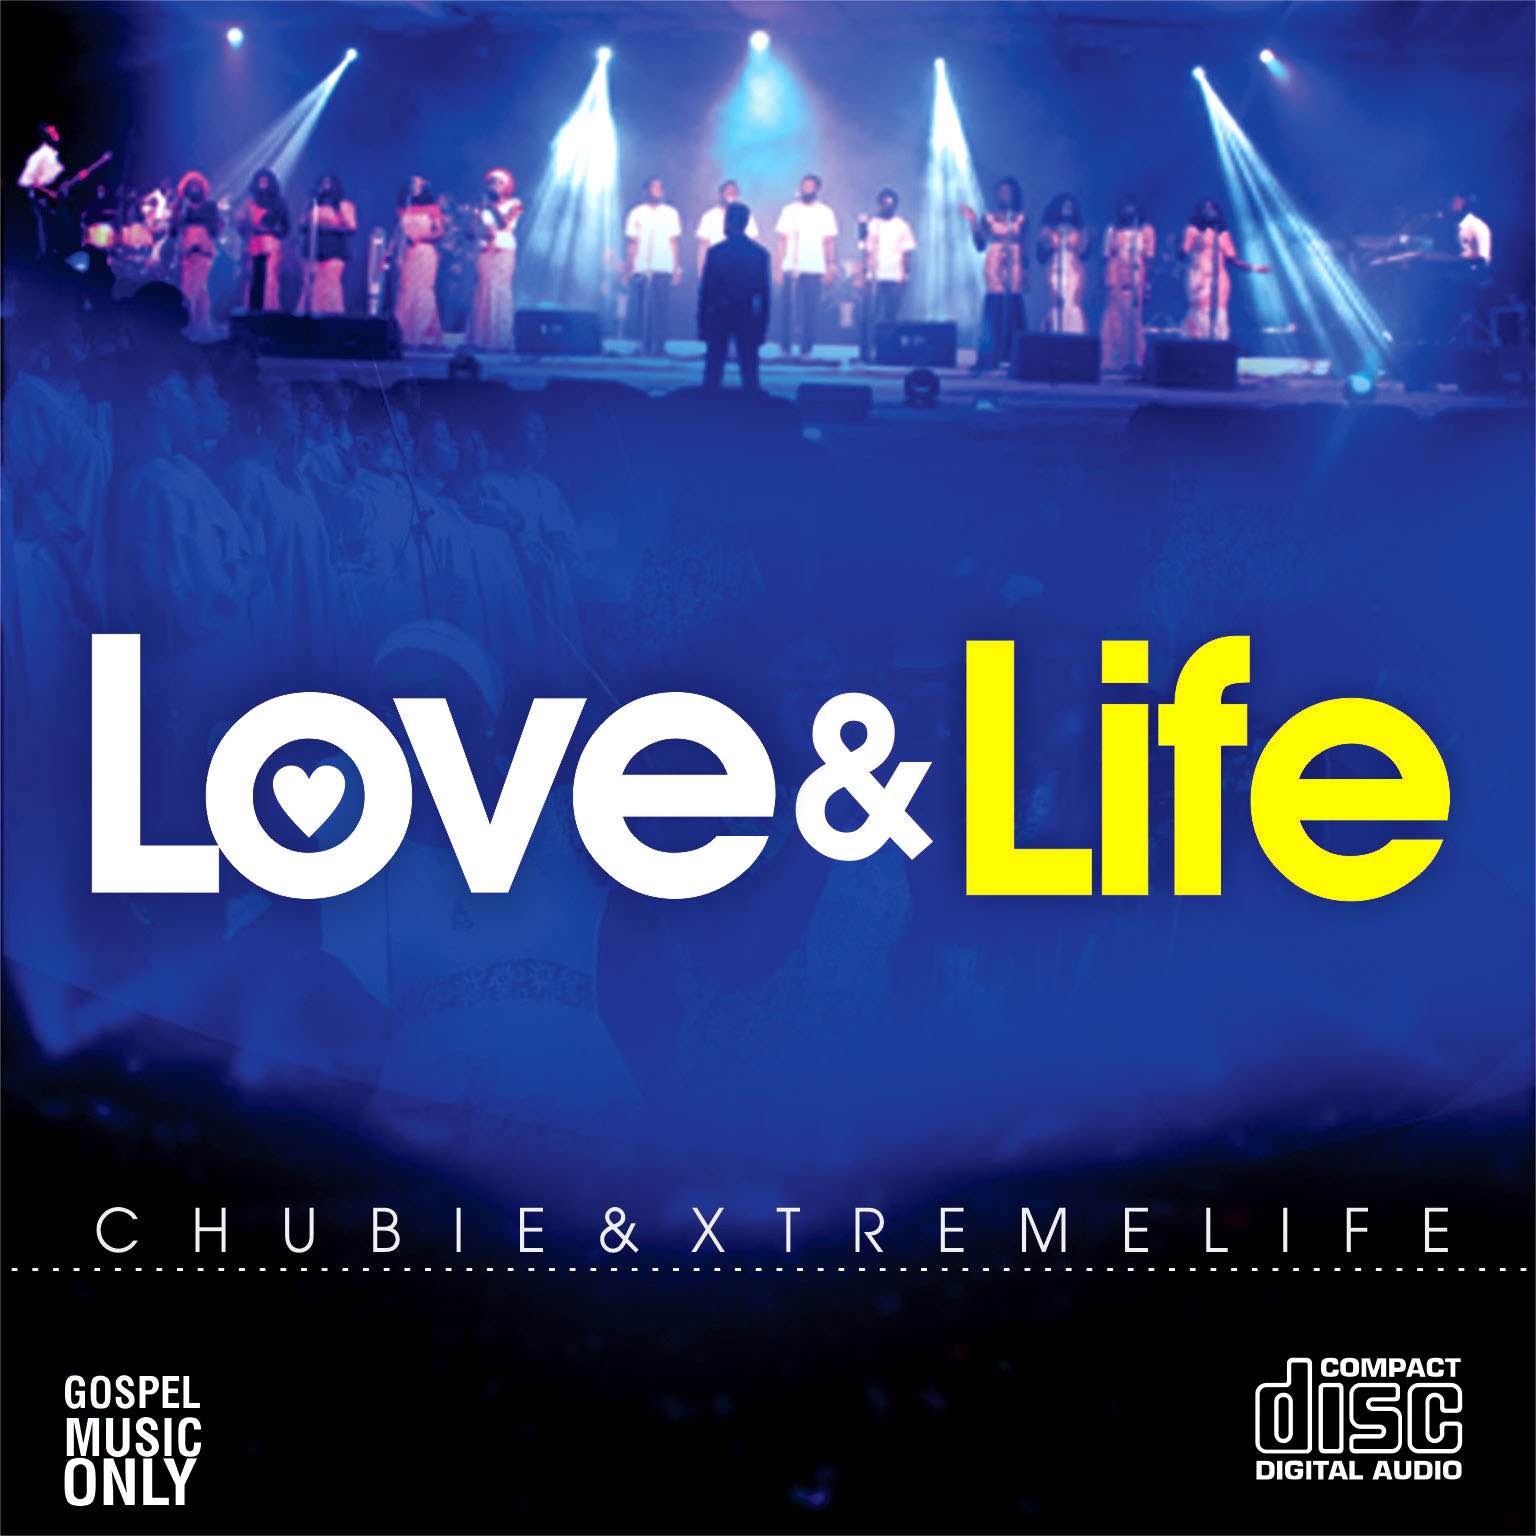 Chubie & Xtremelife Releases New Album “Love & Life” Available Now!!! [@xtremelifeM] 1